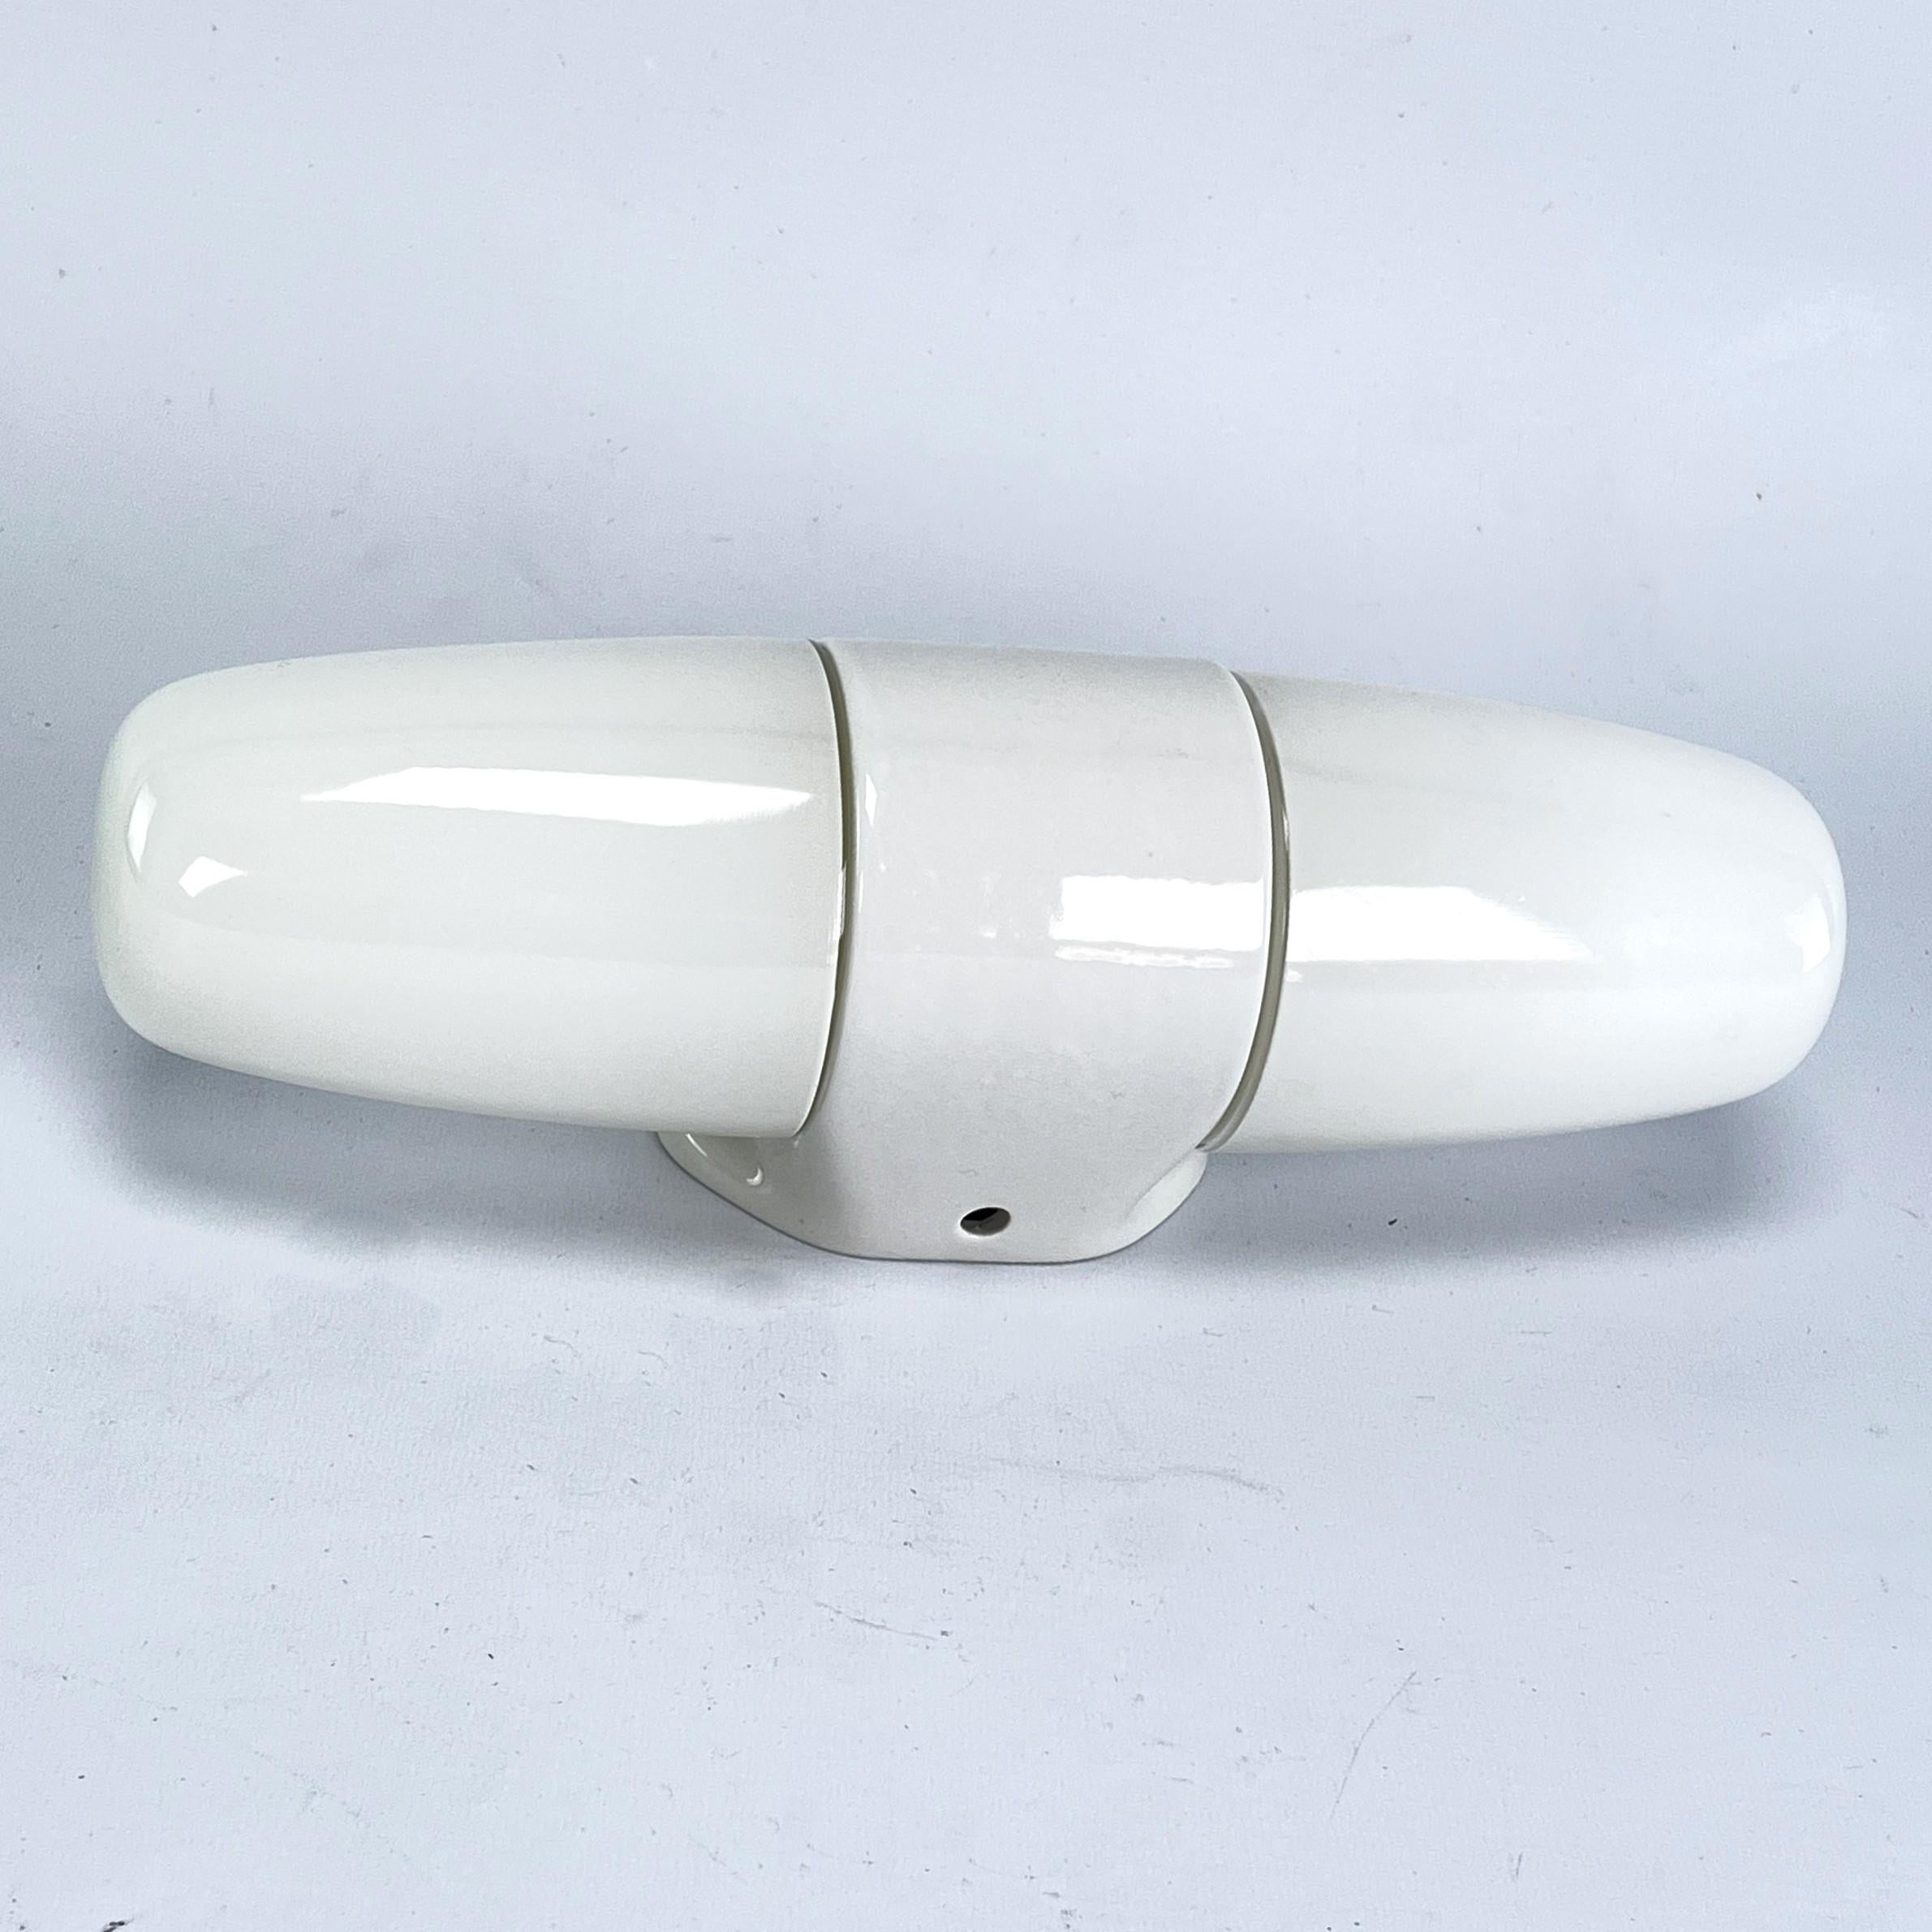  Midcentury lamp by Wagenfeld, 1950s, no. 6078Z

The wall lamp is an original designer Classic from the 1950s. The wall lamp is a design by Wilhelm Wagenfeld for Lindner GmbH. The white lamp gives a pleasant light. The item has the model number Ifö: